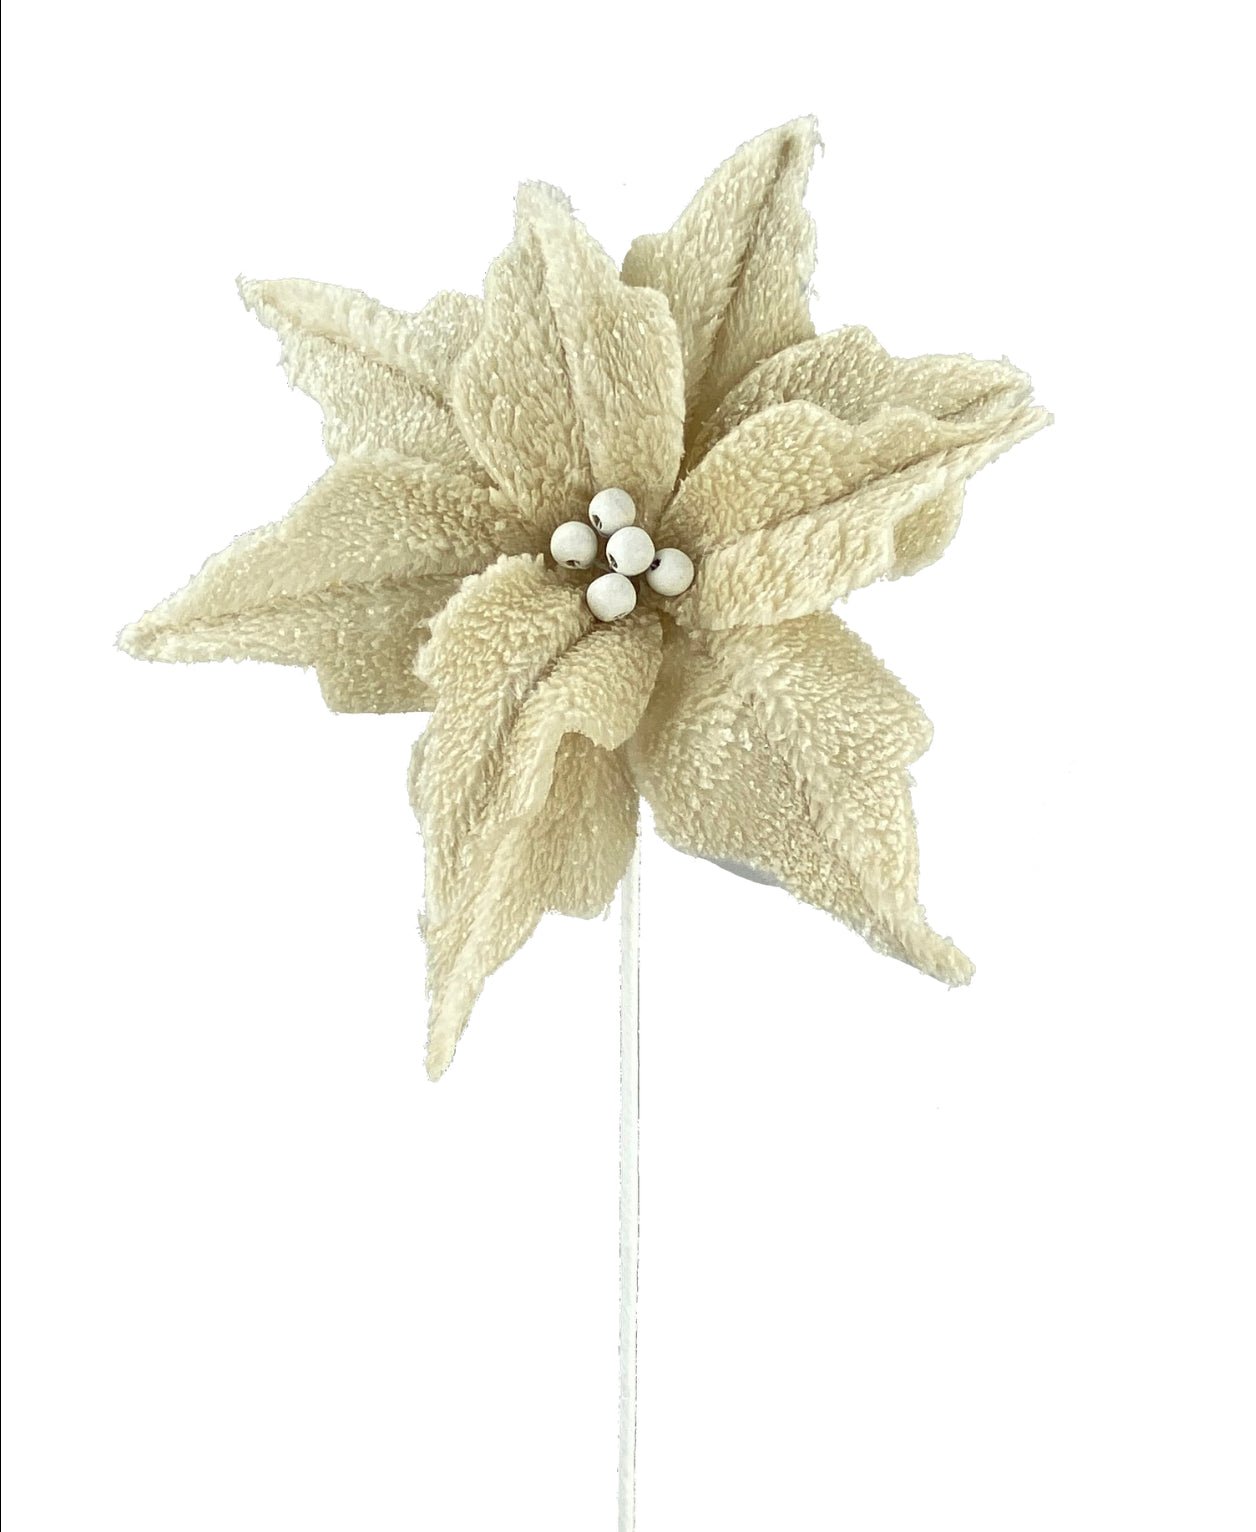 Tan fluffy poinsettias with wood beads - Greenery Marketartificial flowers85634BN